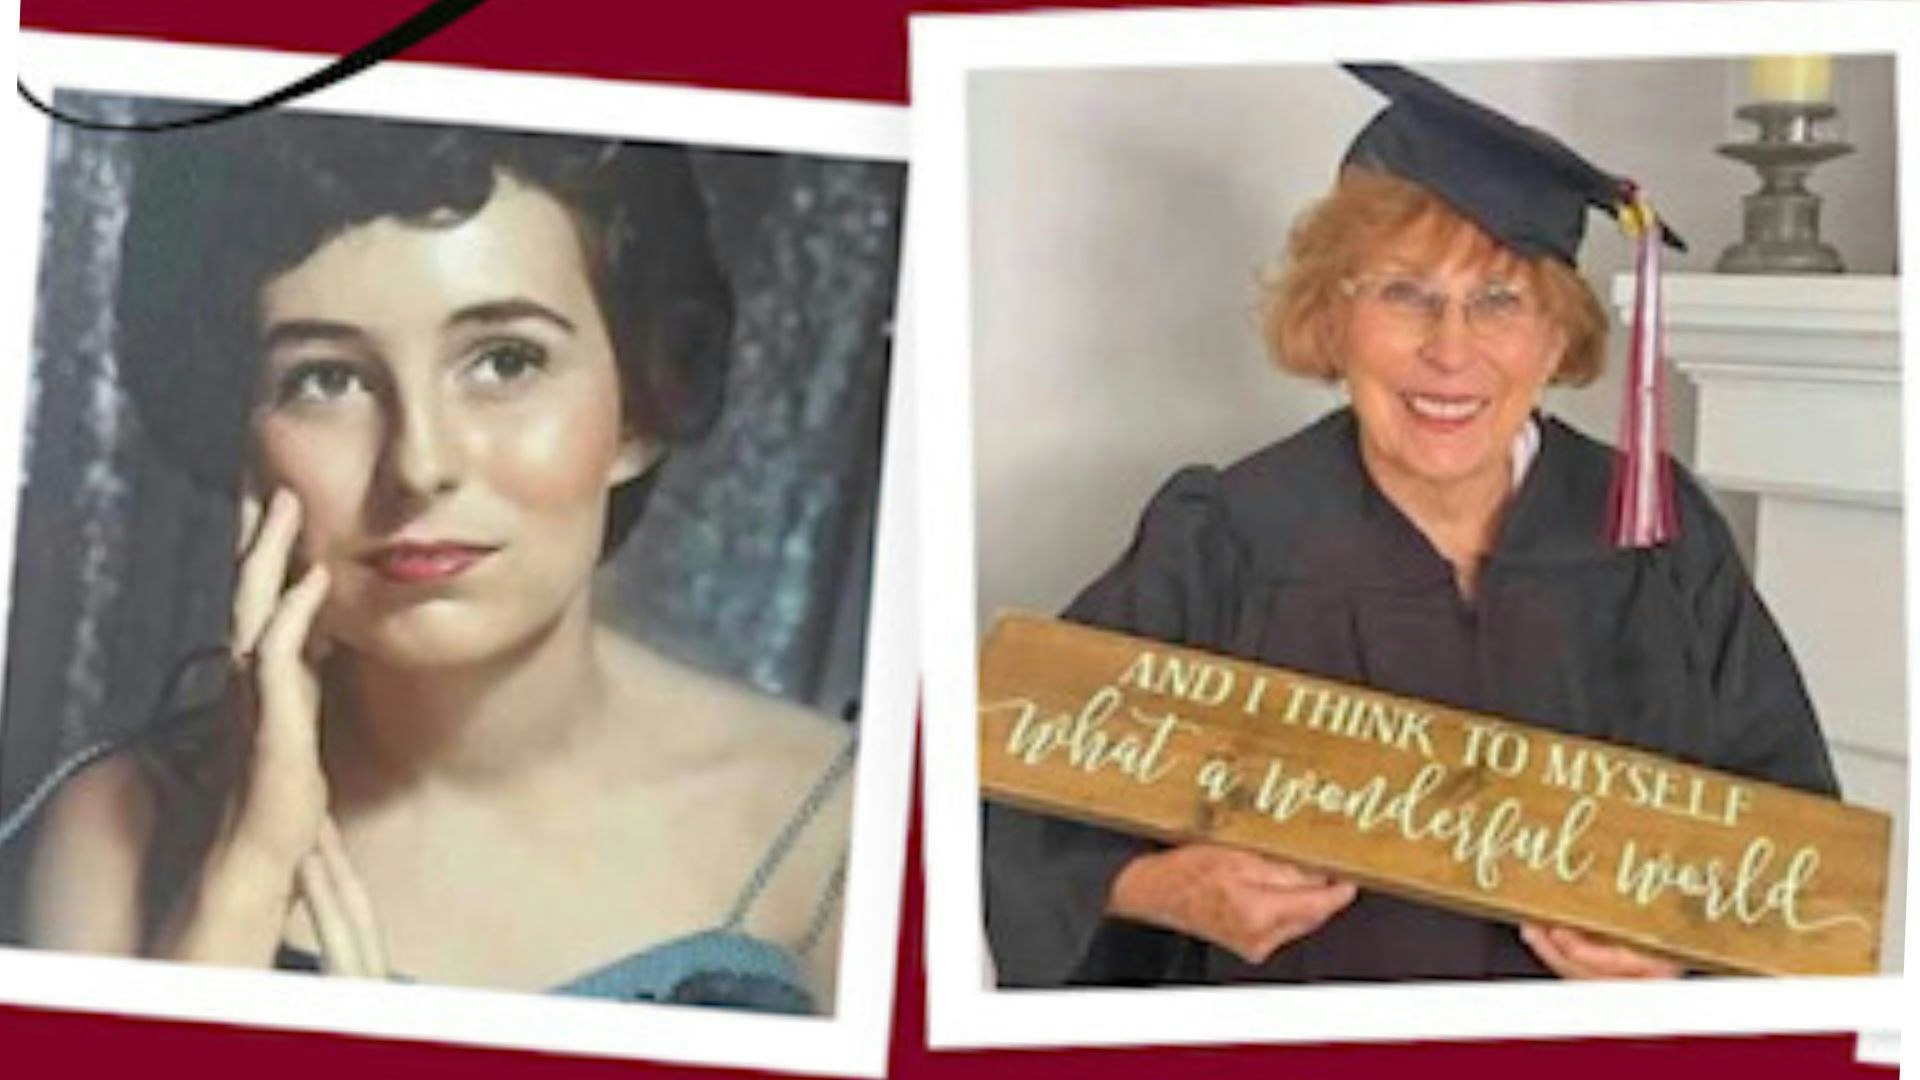 Education has always been important for Doris "Mickey" Douglas, who never gave up on her goal to earn a college degree. She did that May 6 when she graduated with the class of 2023 from Chadron State College in Nebraska at age 81.